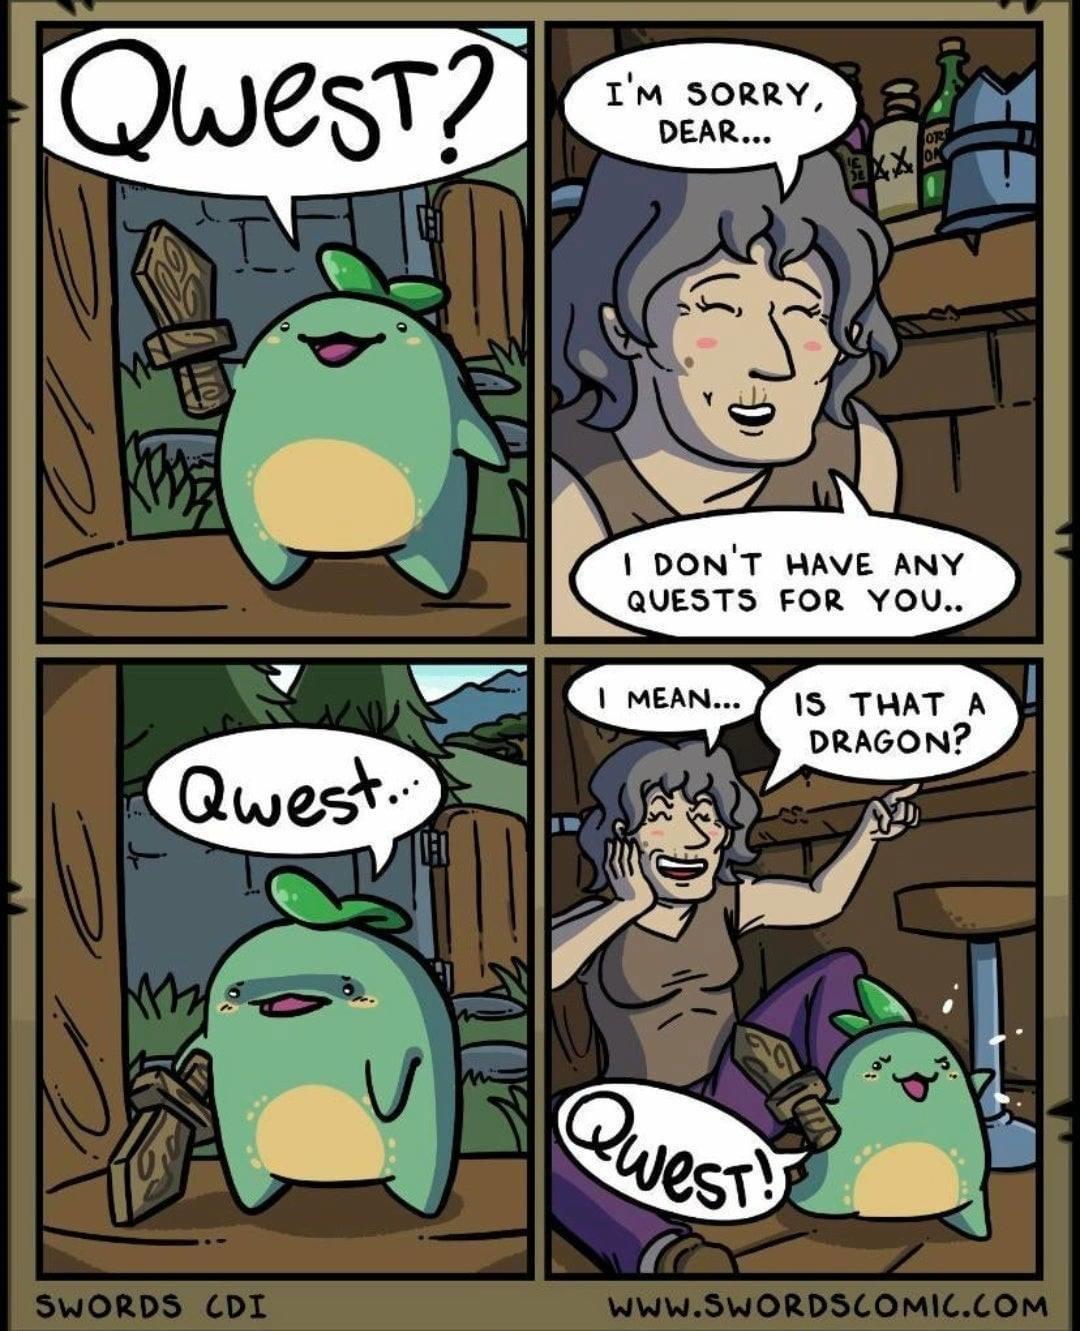 gaming memes - qwest comic - Qwest? I'M Sorry, Dear... I Don'T Have Any Quests For You.. I Mean... Is That A Dragon? Qwest... Mme Quest Swords Cdi